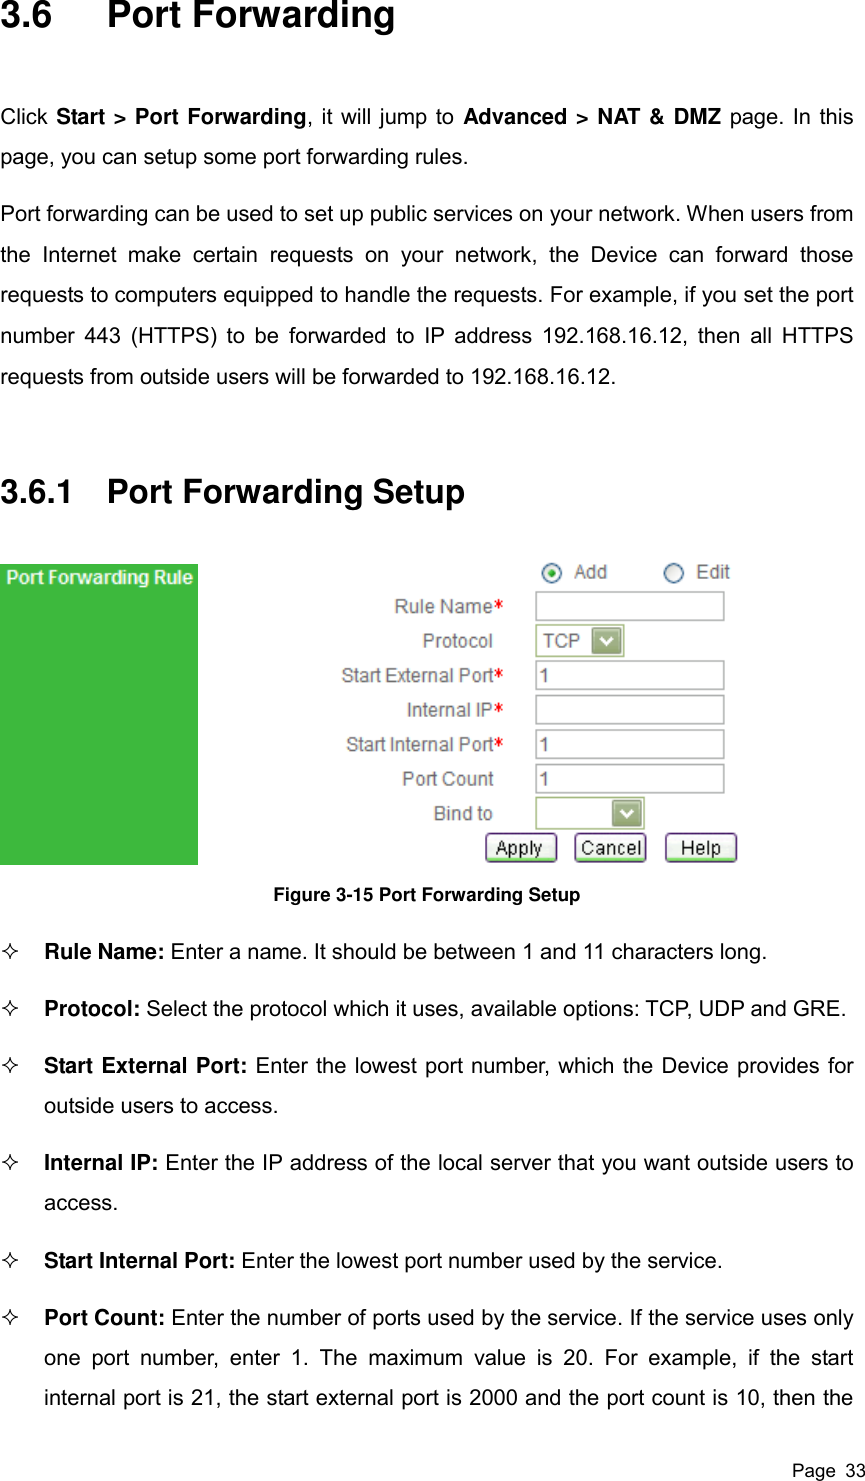  Page  33 3.6  Port Forwarding Click Start &gt; Port Forwarding, it will jump to Advanced &gt; NAT &amp; DMZ page. In this page, you can setup some port forwarding rules.   Port forwarding can be used to set up public services on your network. When users from the  Internet  make  certain  requests  on  your  network,  the  Device  can  forward  those requests to computers equipped to handle the requests. For example, if you set the port number 443 (HTTPS) to be  forwarded to IP address 192.168.16.12,  then all HTTPS requests from outside users will be forwarded to 192.168.16.12. 3.6.1  Port Forwarding Setup  Figure 3-15 Port Forwarding Setup  Rule Name: Enter a name. It should be between 1 and 11 characters long.  Protocol: Select the protocol which it uses, available options: TCP, UDP and GRE.  Start External Port: Enter the lowest port number, which the Device provides for outside users to access.    Internal IP: Enter the IP address of the local server that you want outside users to access.  Start Internal Port: Enter the lowest port number used by the service.  Port Count: Enter the number of ports used by the service. If the service uses only one  port  number,  enter  1.  The  maximum  value  is  20.  For  example,  if  the  start internal port is 21, the start external port is 2000 and the port count is 10, then the 